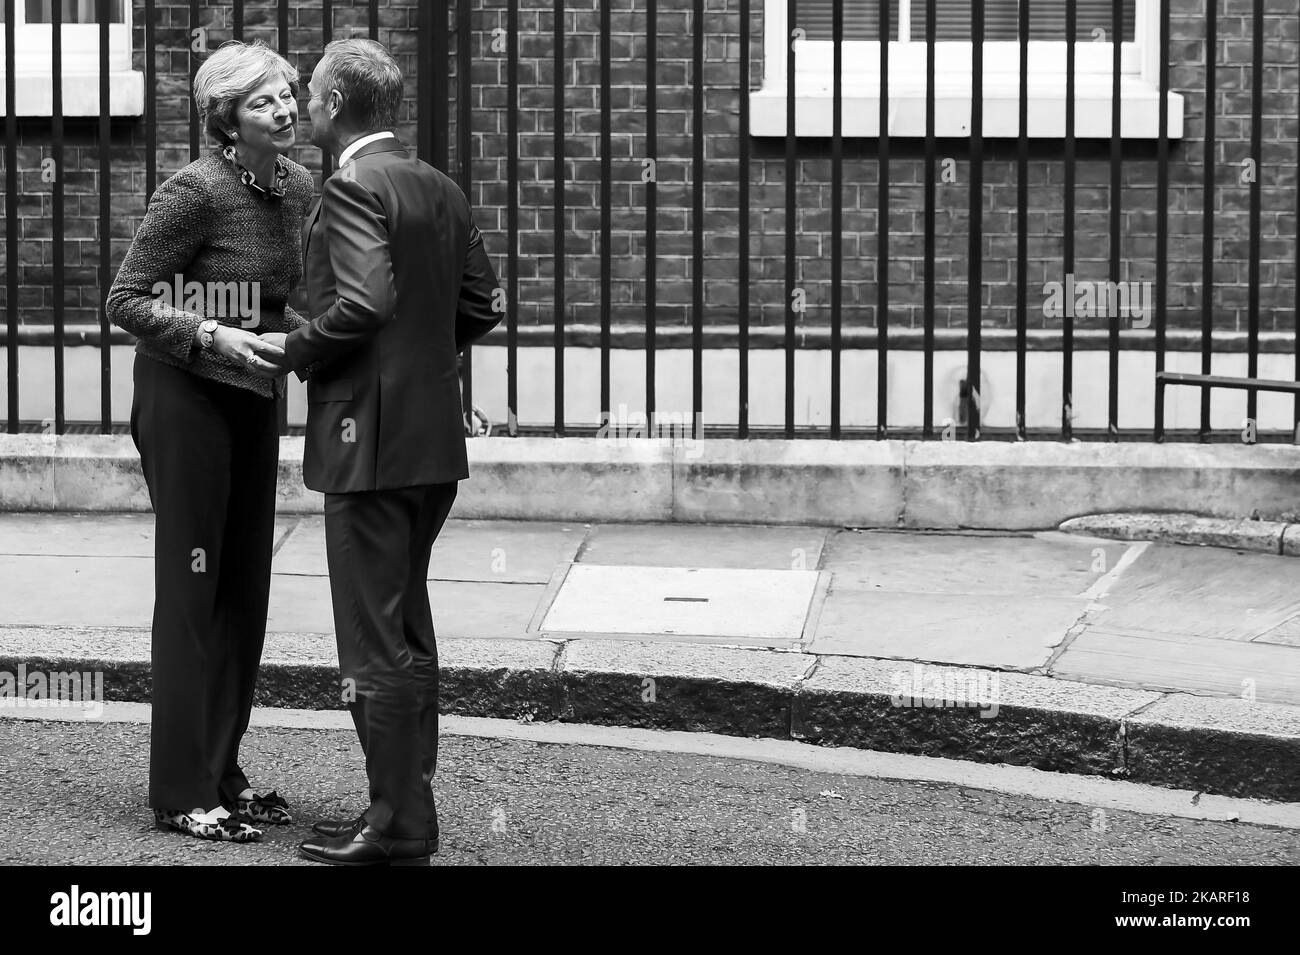 British Prime Minister Theresa May (L) greets President of the European Council, Donald Tusk in Downing Street, London on September 26, 2017. Theresa May welcomed the President of the European Council, Donald Tusk, to Downing Street for the first time since she set out plans for a two-year transition period post-Brexit. (Photo by Alberto Pezzali/NurPhoto) Stock Photo